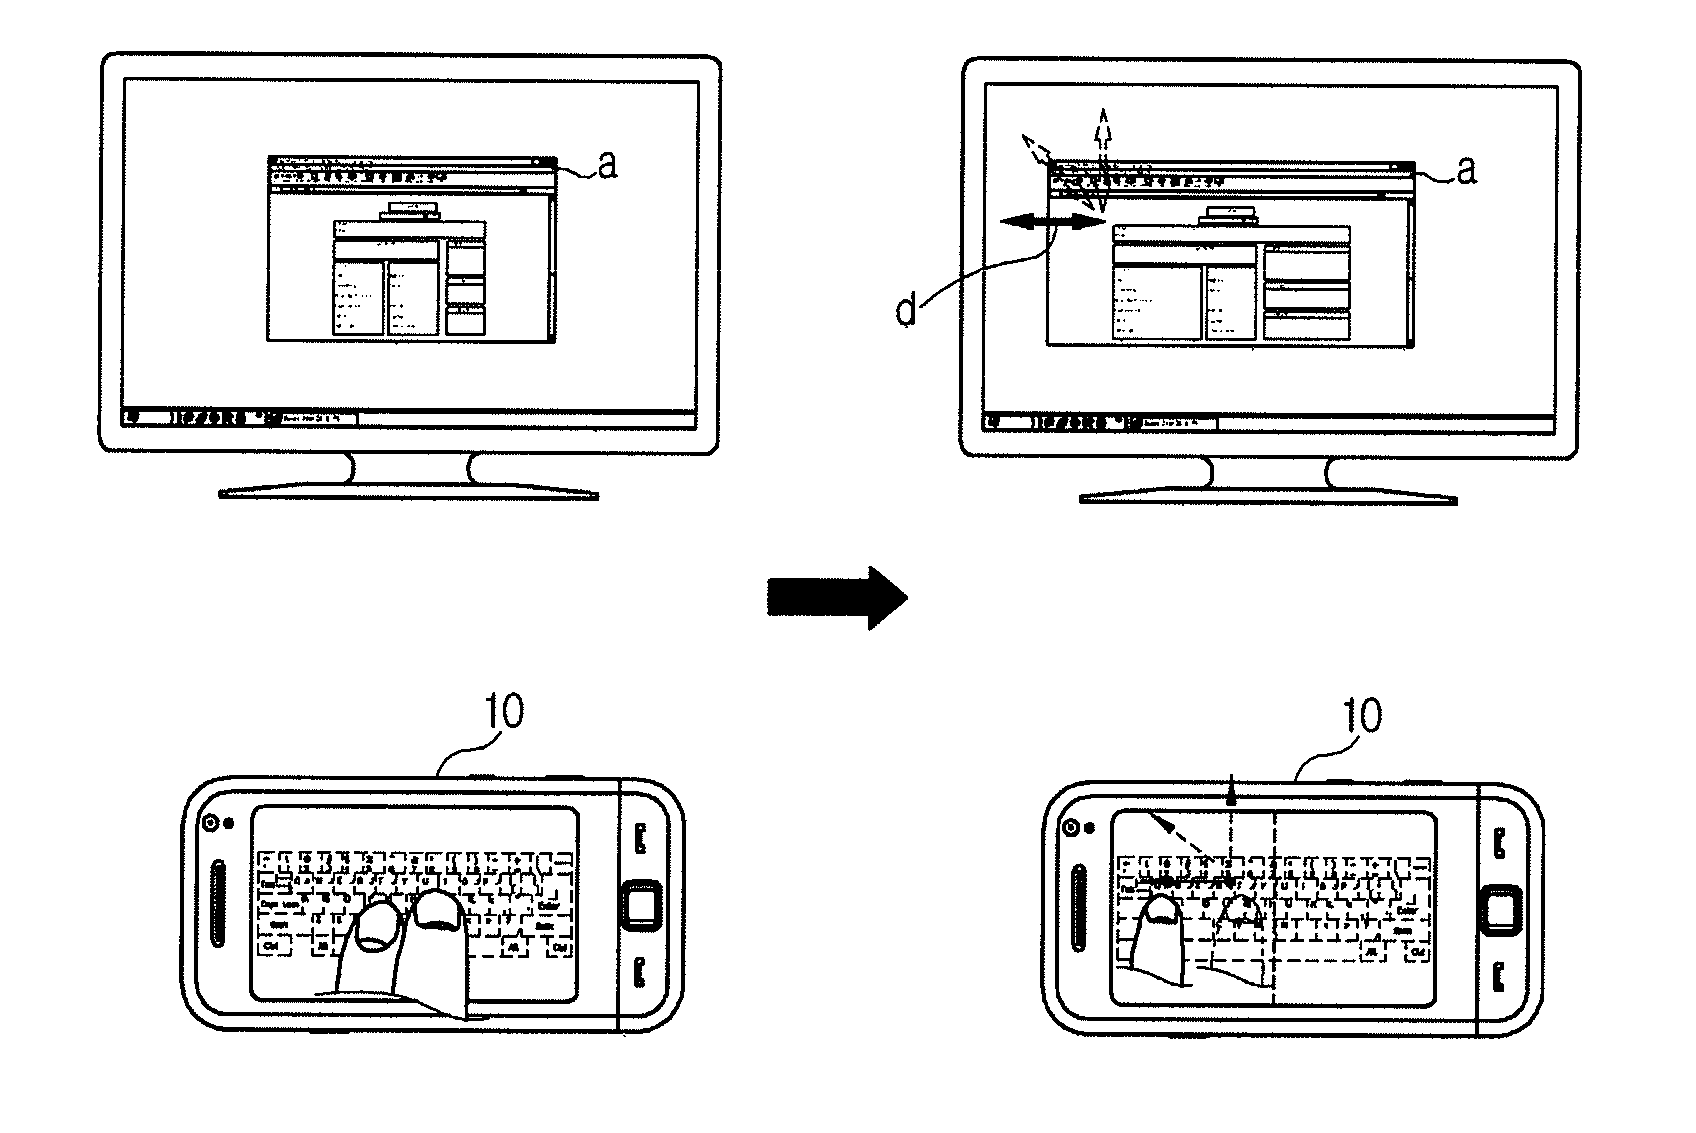 Multi-touch input control system